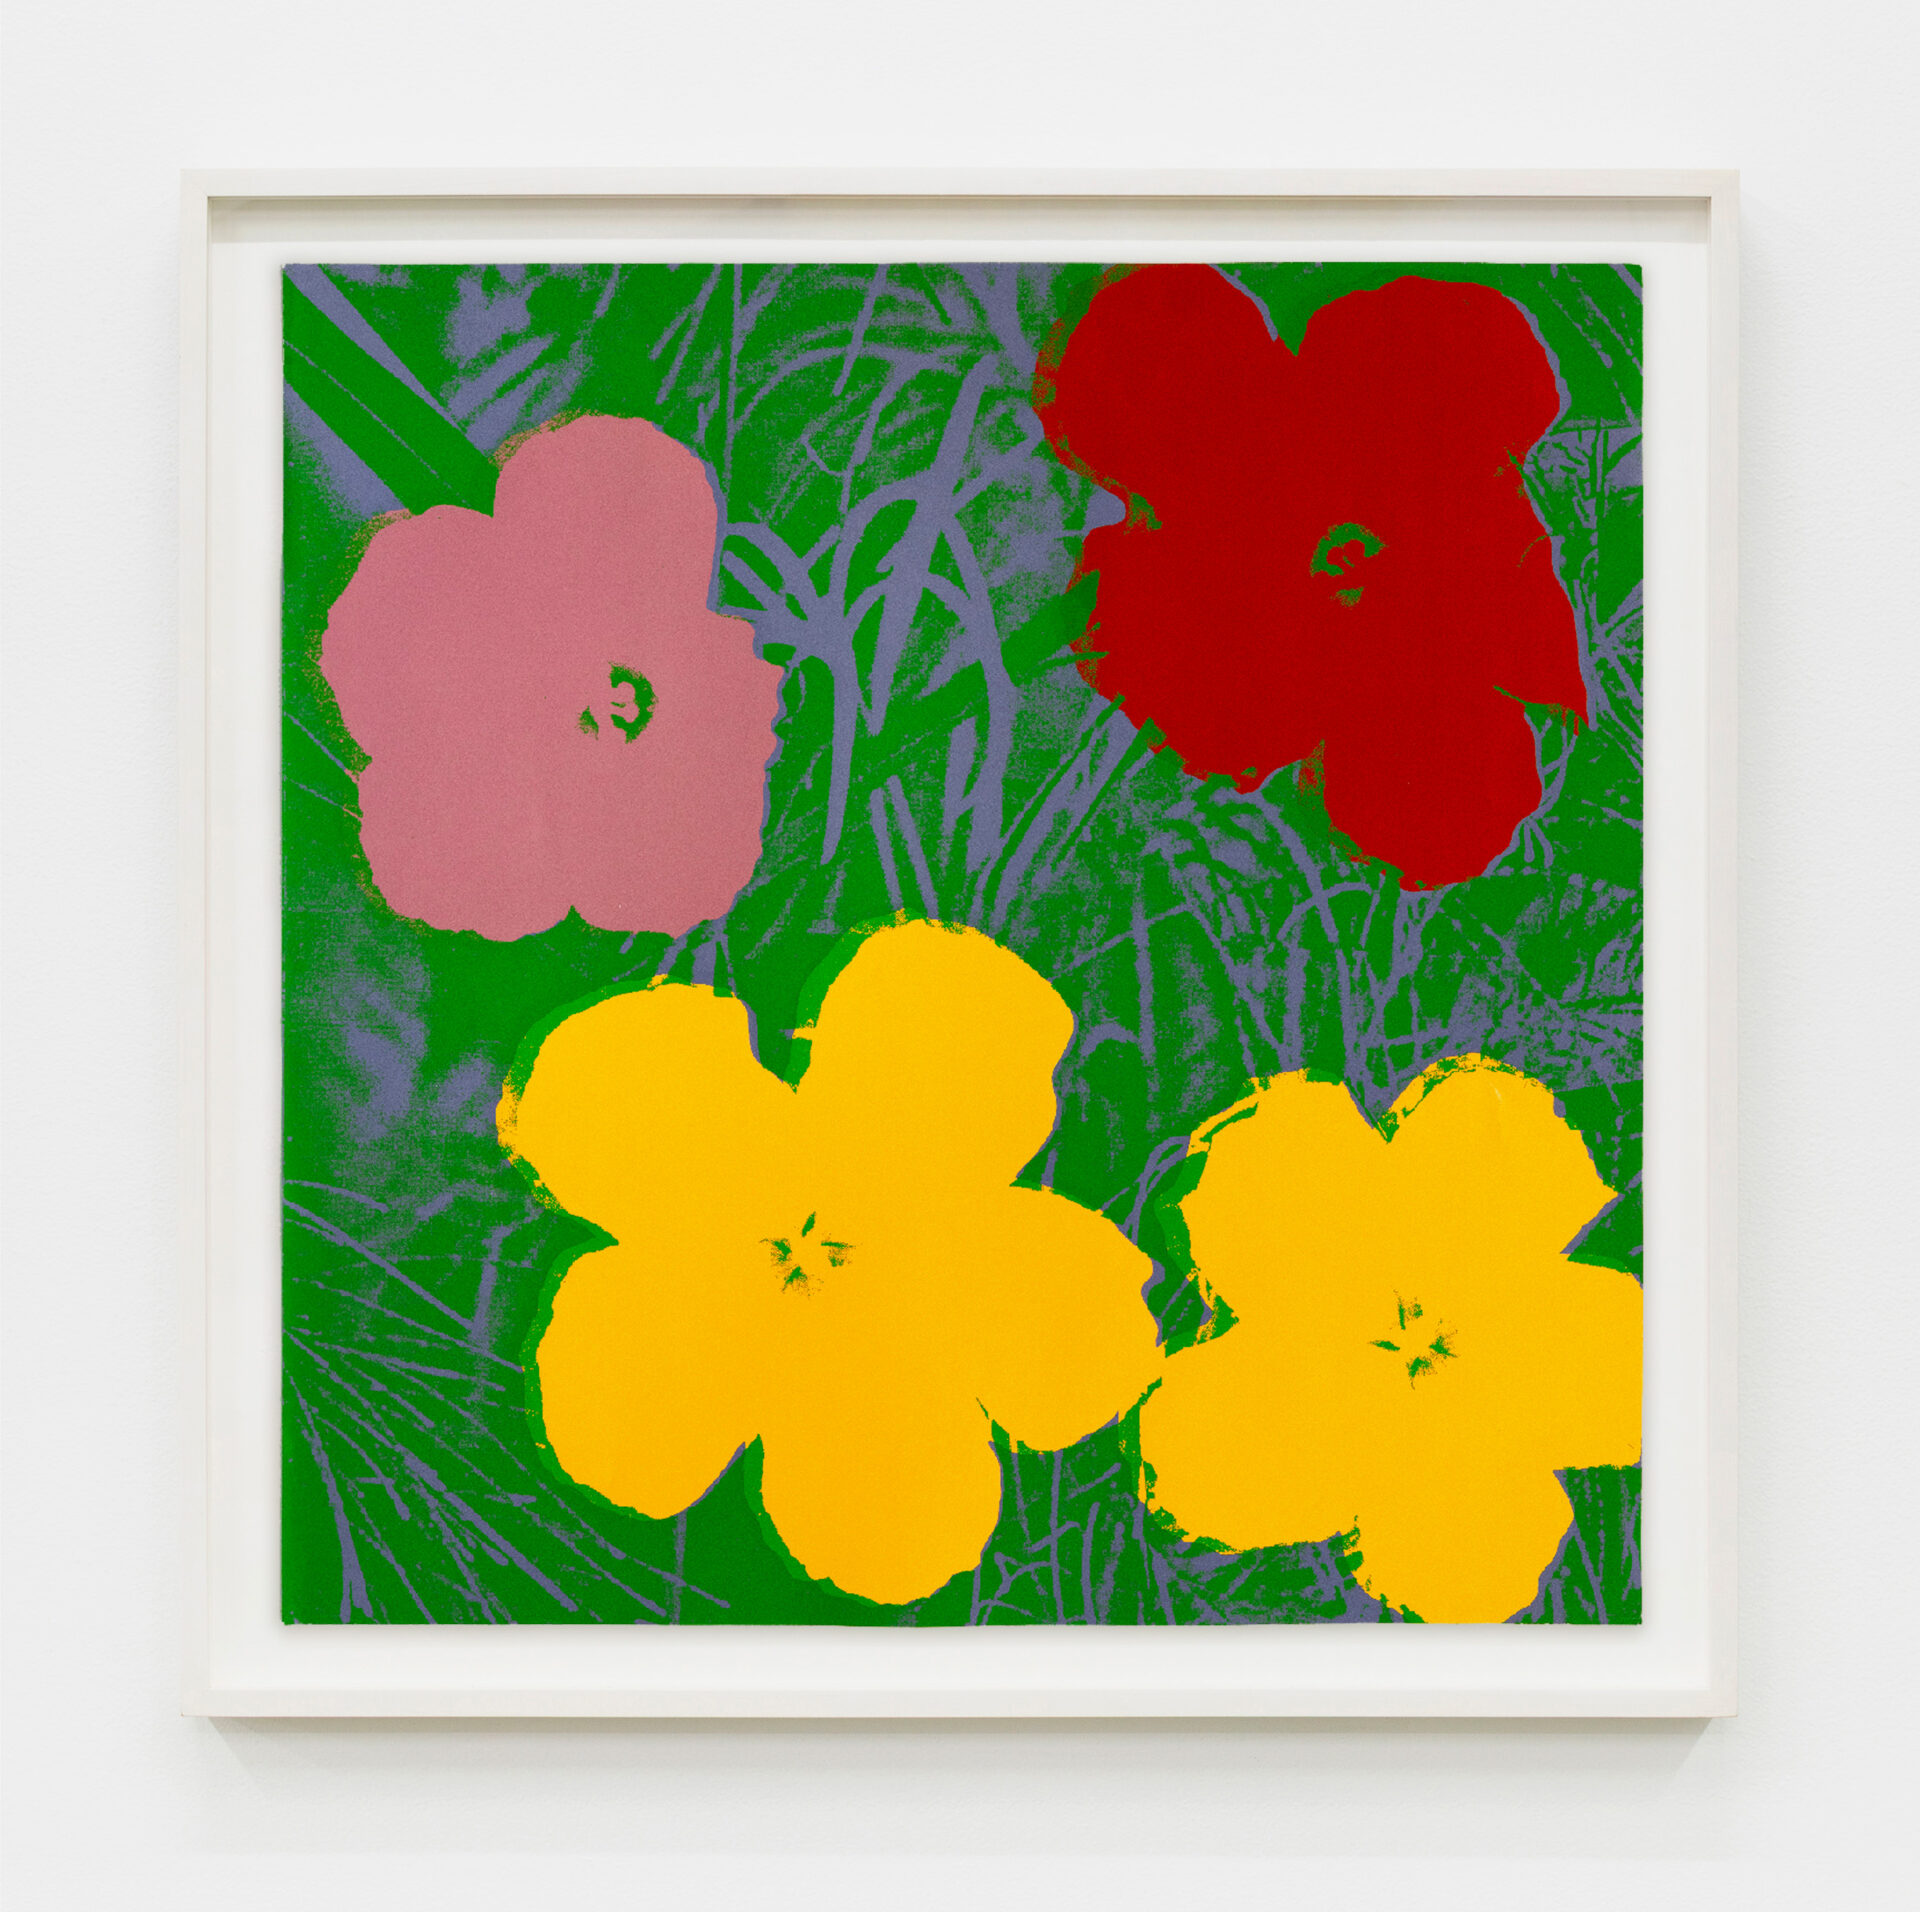 Andy Warhol Flowers (F. & S. II.65), 1970 Screenprint Paper Dimensions: 36 x 36 inches (91.4 x 91.4 cm) Framed Dimensions: 39 1/8 x 39 1/8 inches (99.4 x 99.4 cm) Edition of 250